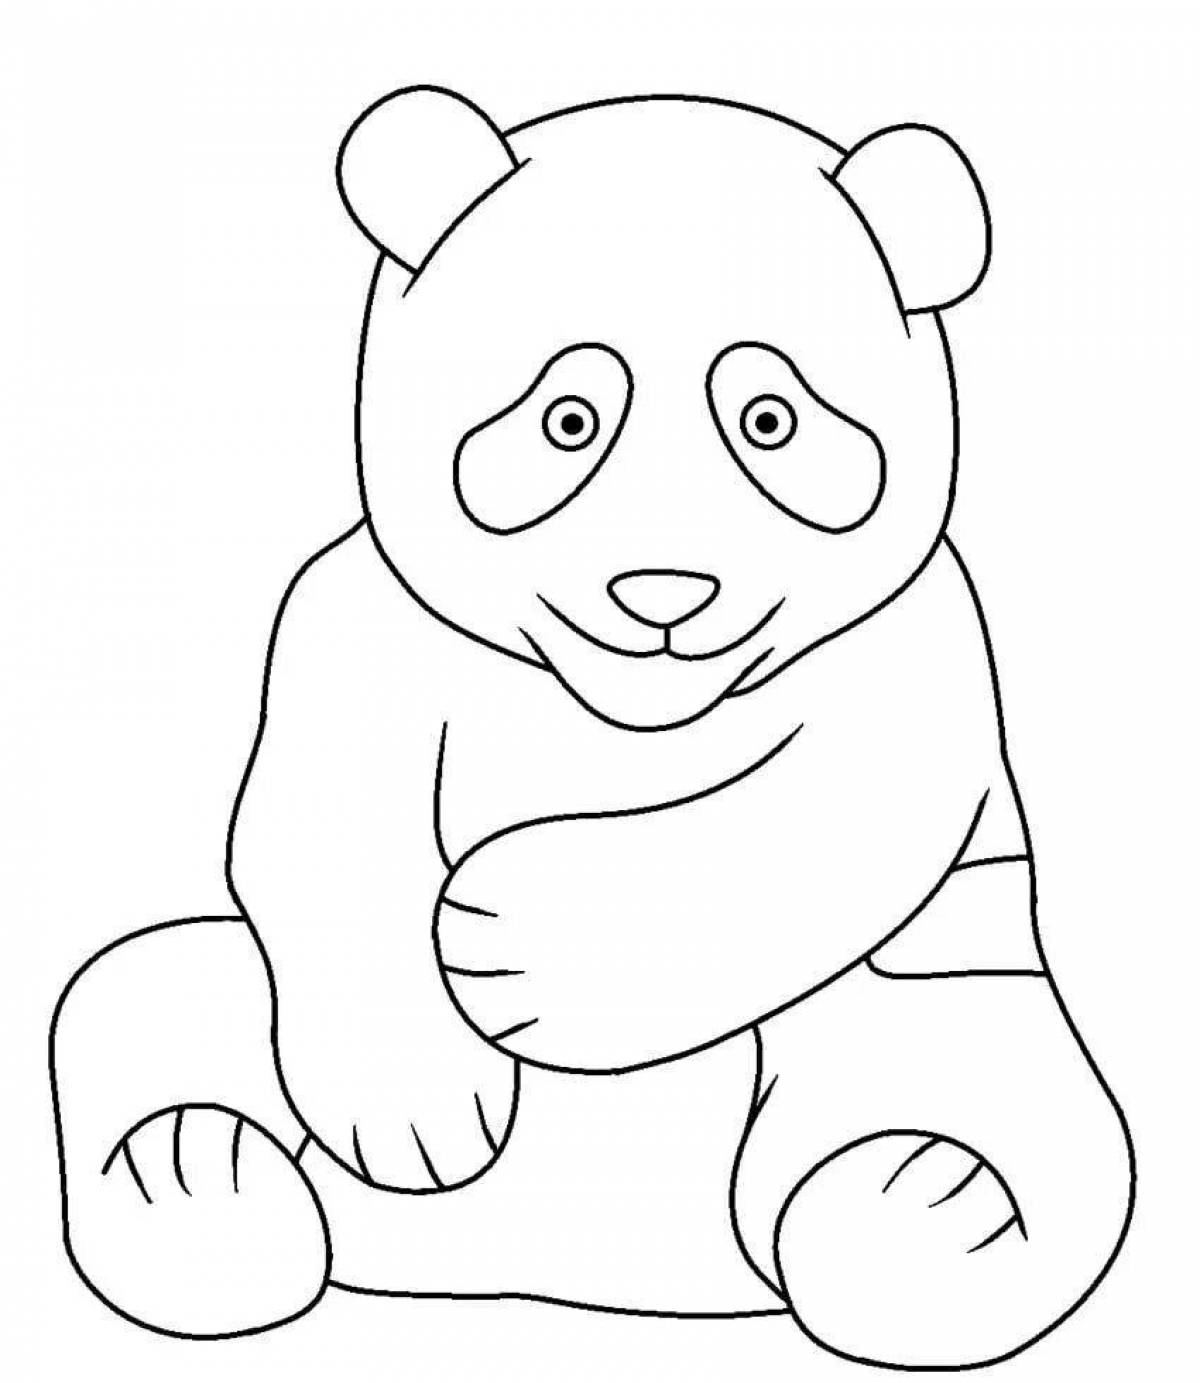 Shiny Teddy Bear coloring book for ages 5-6